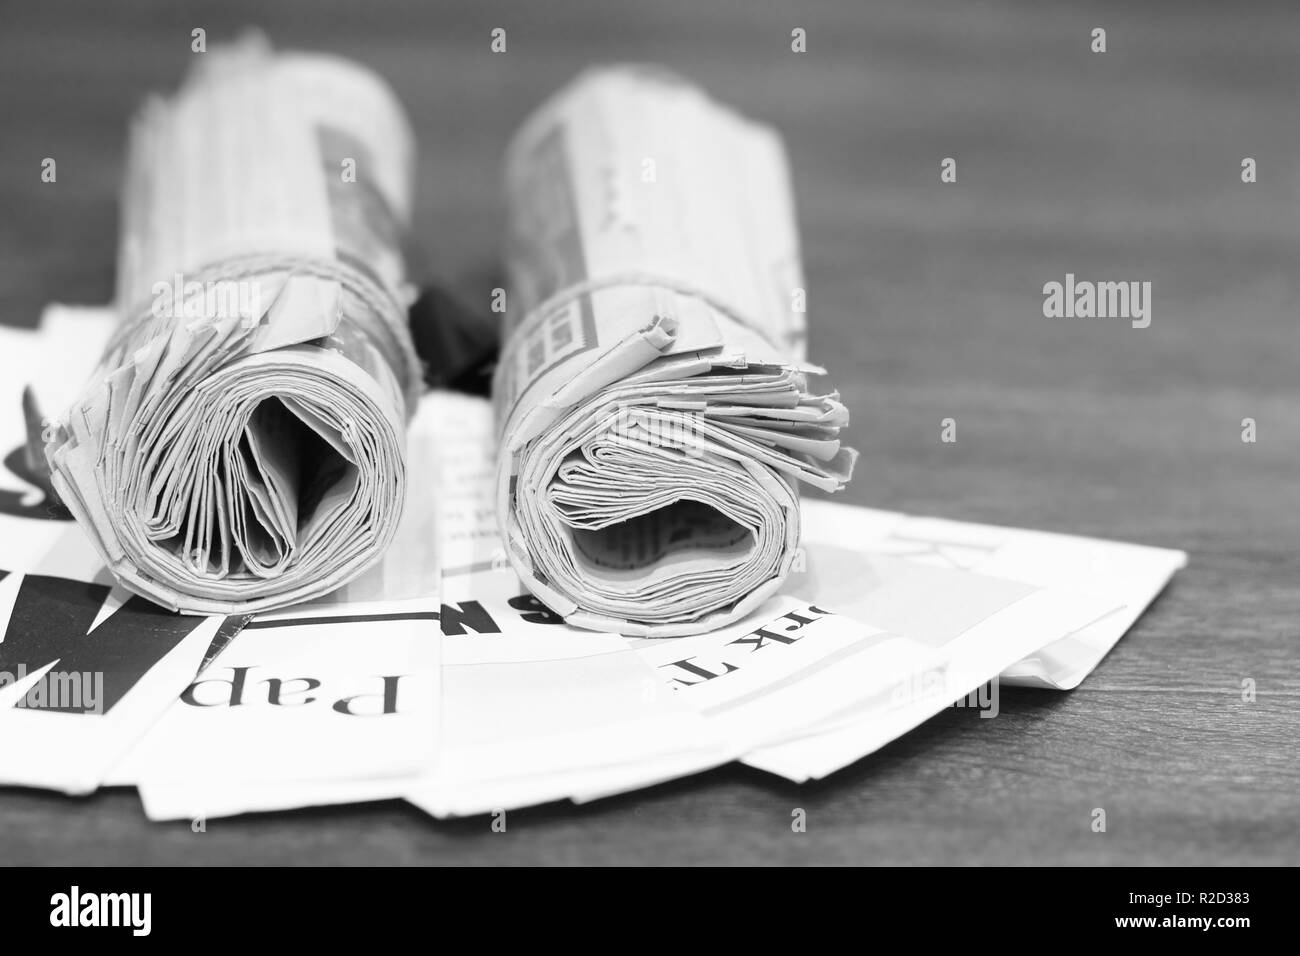 Morning newspapers and journals on table at office. Latest financial and business news in daily papers. Pages with headlines, articles, photos, text Stock Photo